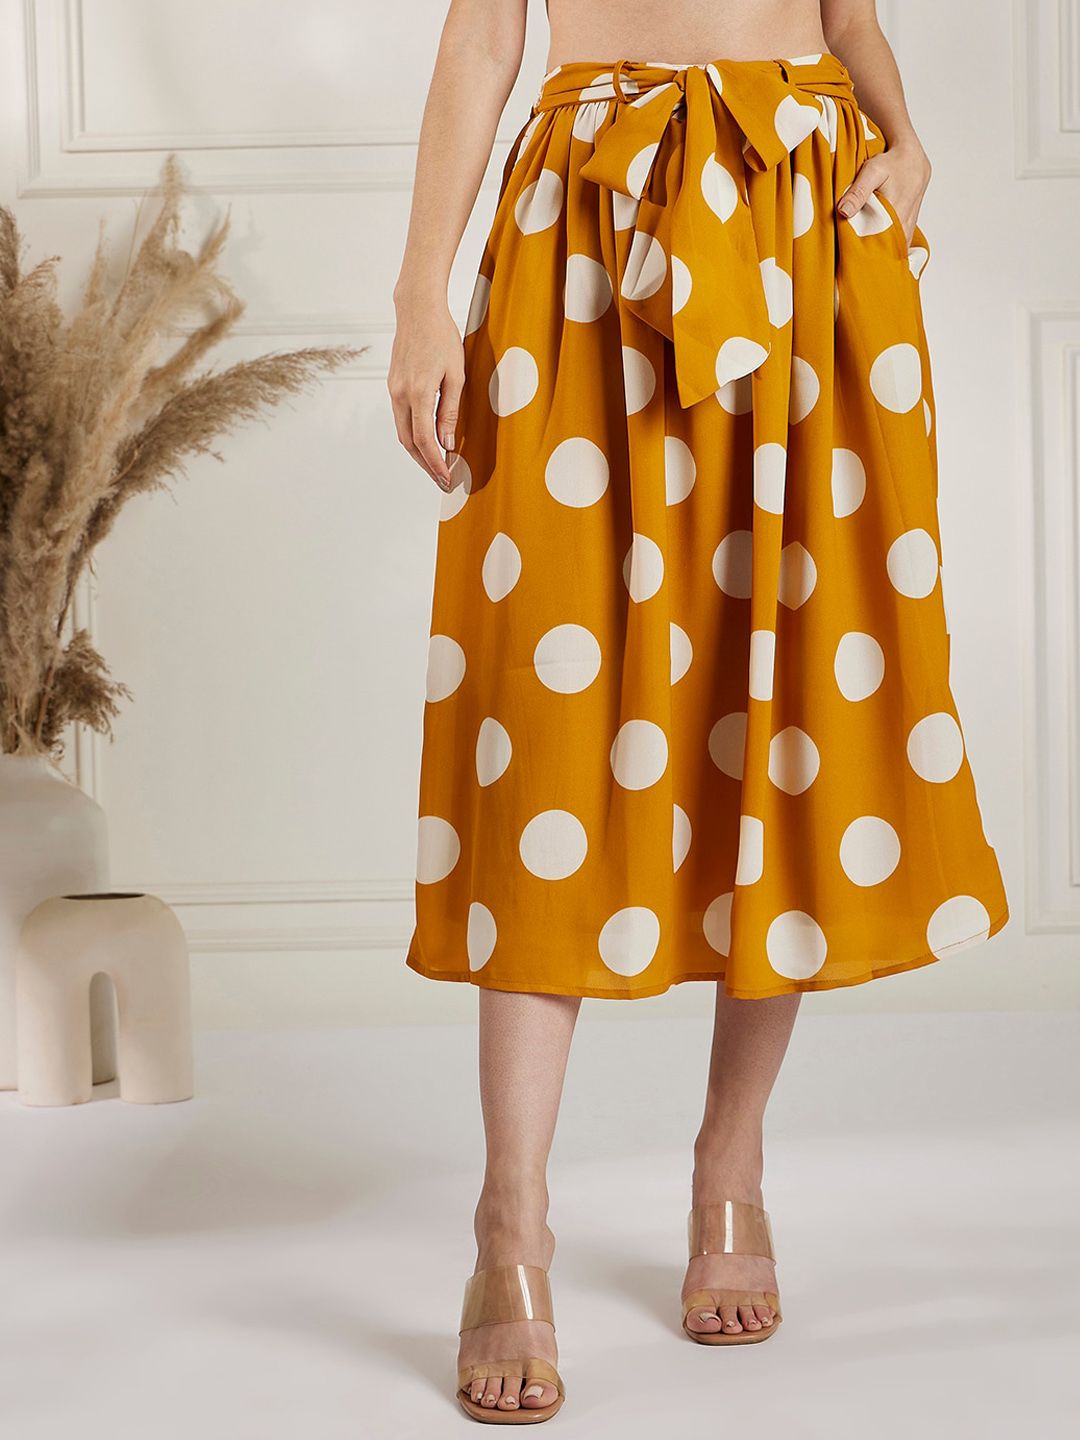 Marie Claire Mustard Yellow Polka Dot Printed Flared Midi Skirt Price in India